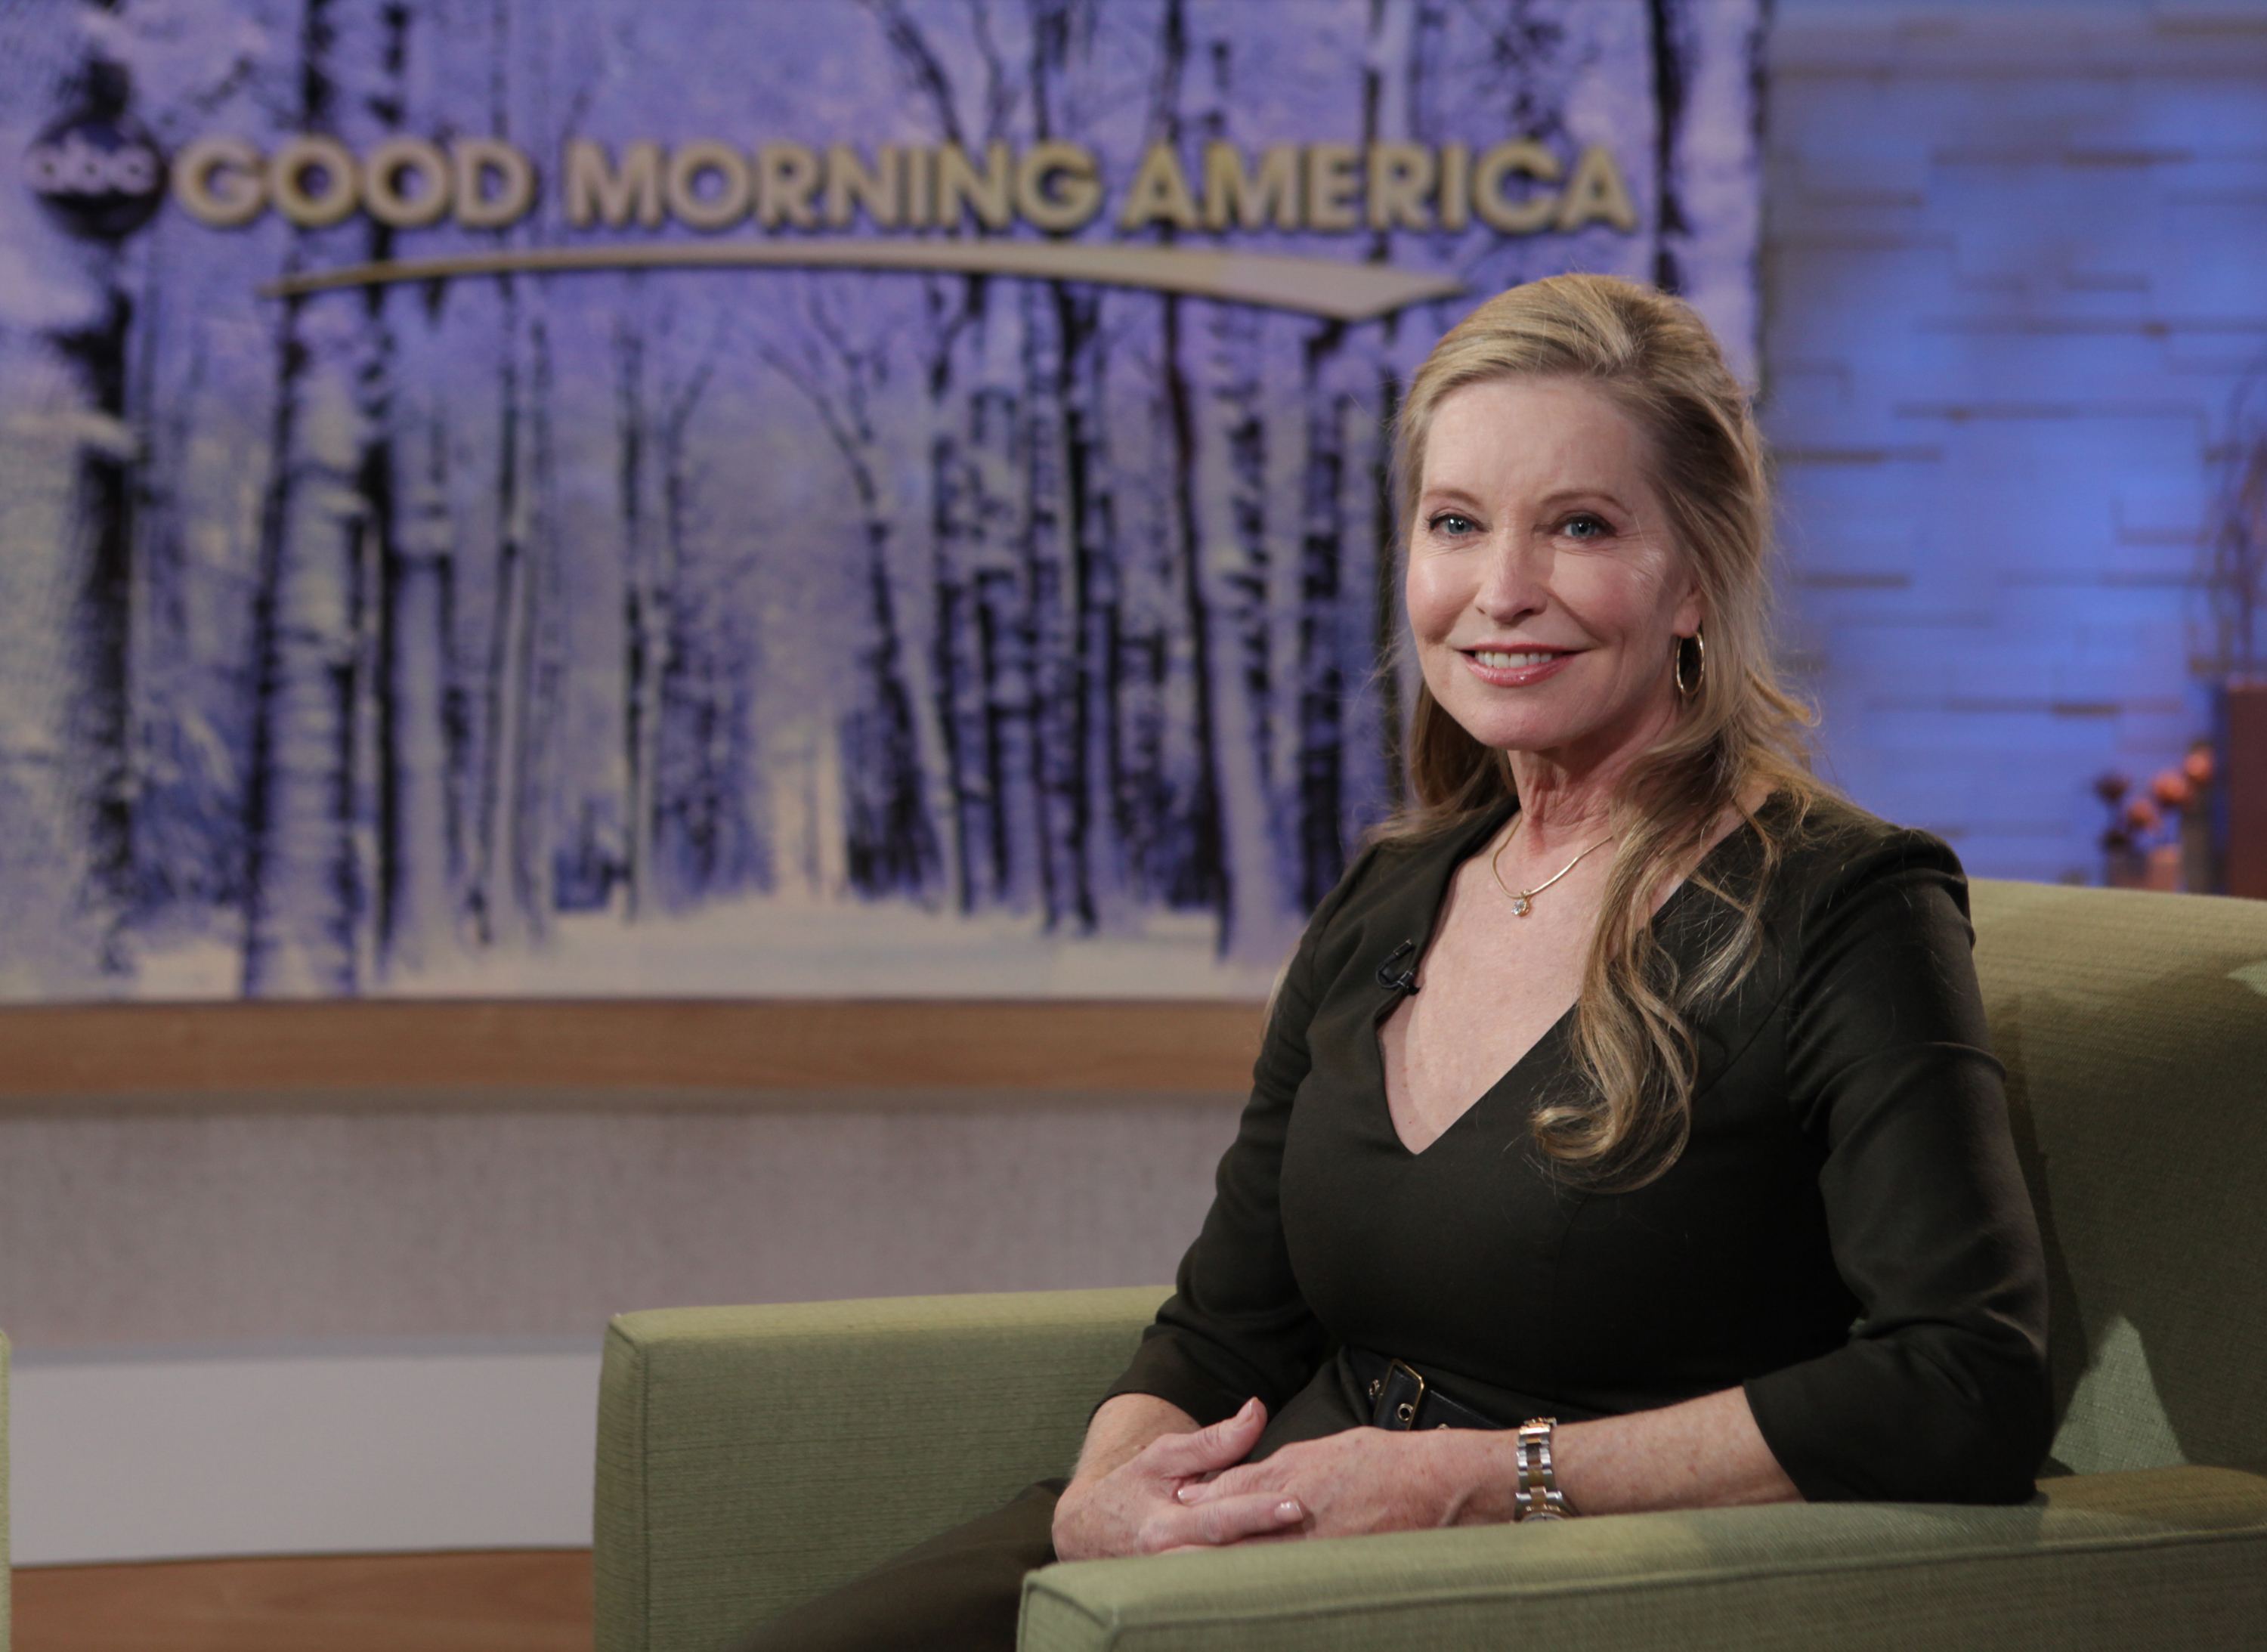 Lisa Niemi on "Good Morning America" on January 12, 2012 | Source: Getty Images